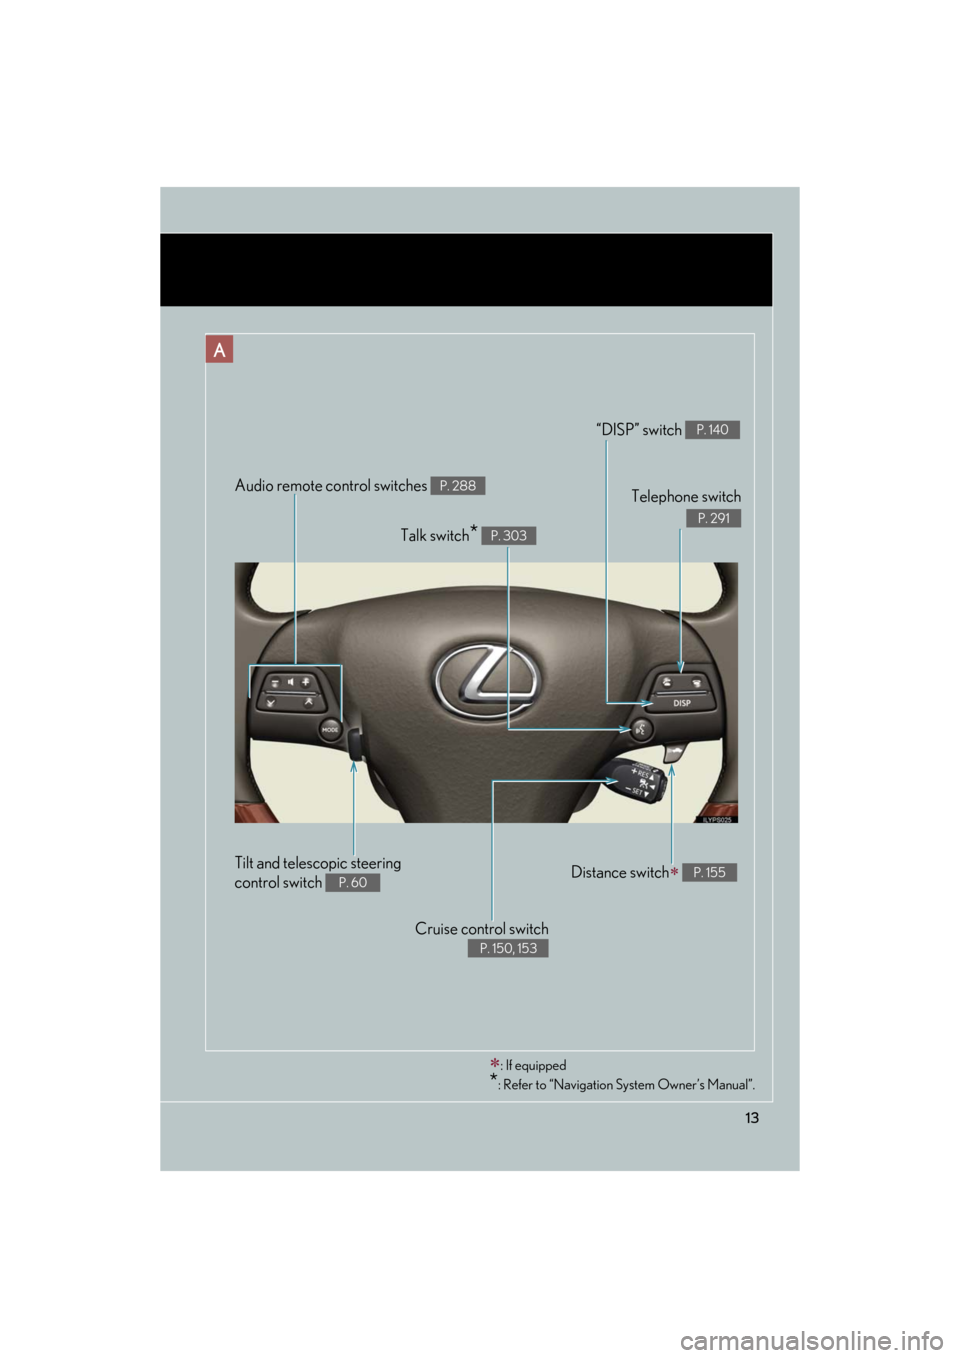 Lexus GS350 2008  Do-it-yourself maintenance / LEXUS 2008 GS460/350 OWNERS MANUAL (OM30A87U) 13
GS_G_U
May 13, 2008 5:14 pm
Audio remote control switches P. 288
Cruise control switch 
 
P. 150, 153
Telephone switch 
P. 291
“DISP” switch P. 140
Distance switch P. 155
Talk switch* P. 303